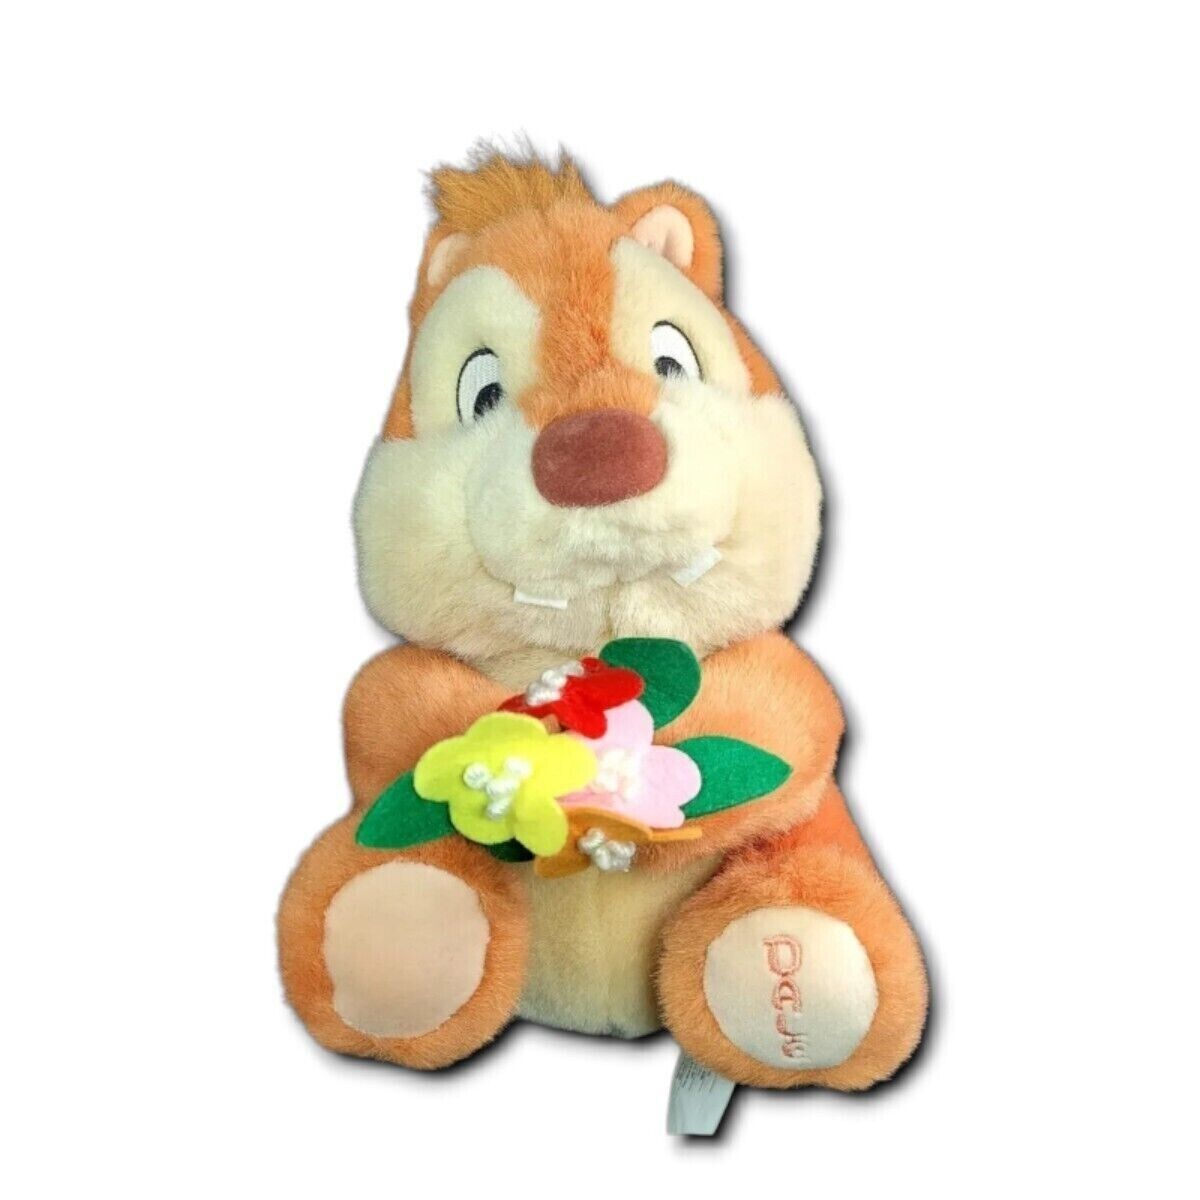 Disney Rescue Rangers Dale with Flowers Embroidered Plush Stuffed Animal Vintage